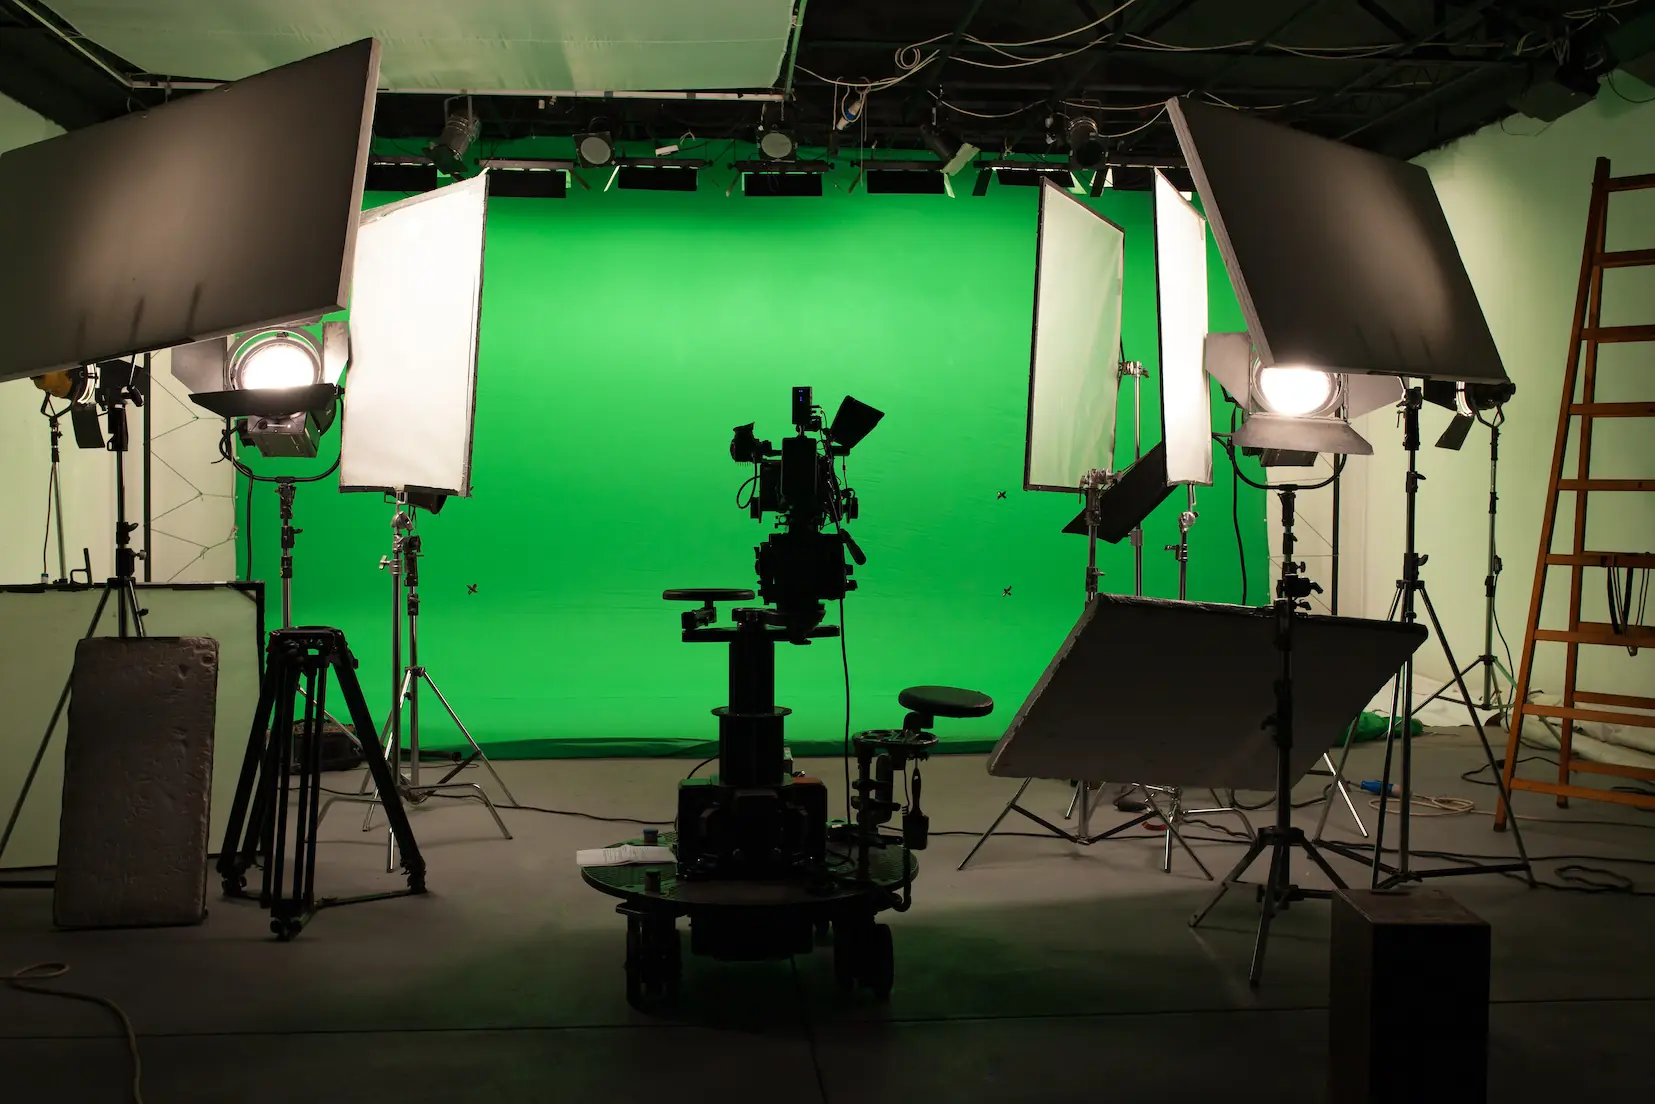 Video production studio full of lights, camera rigs, and shaders. On the back wall is a green screen backdrop